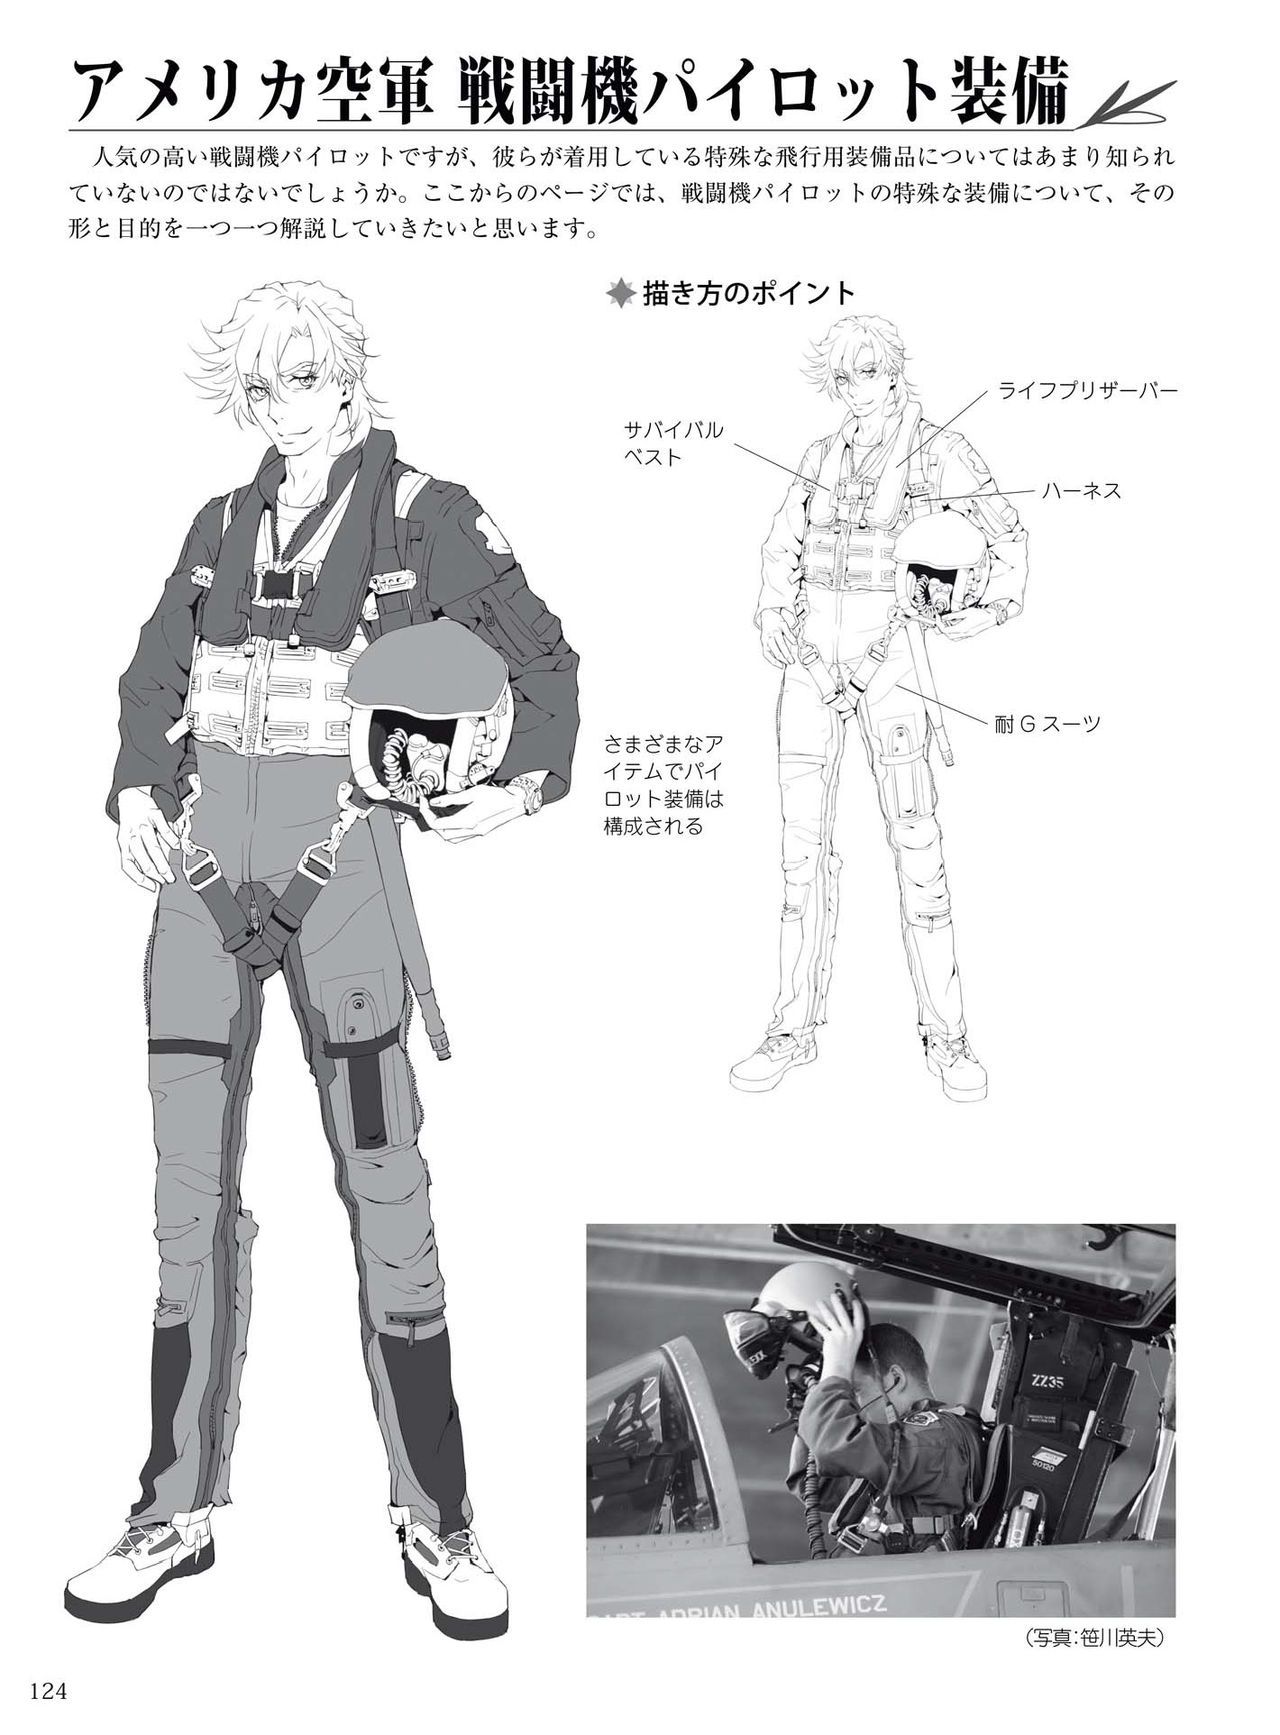 How to draw military uniforms and uniforms From Self-Defense Forces 軍服・制服の描き方 アメリカ軍・自衛隊の制服から戦闘服まで 127